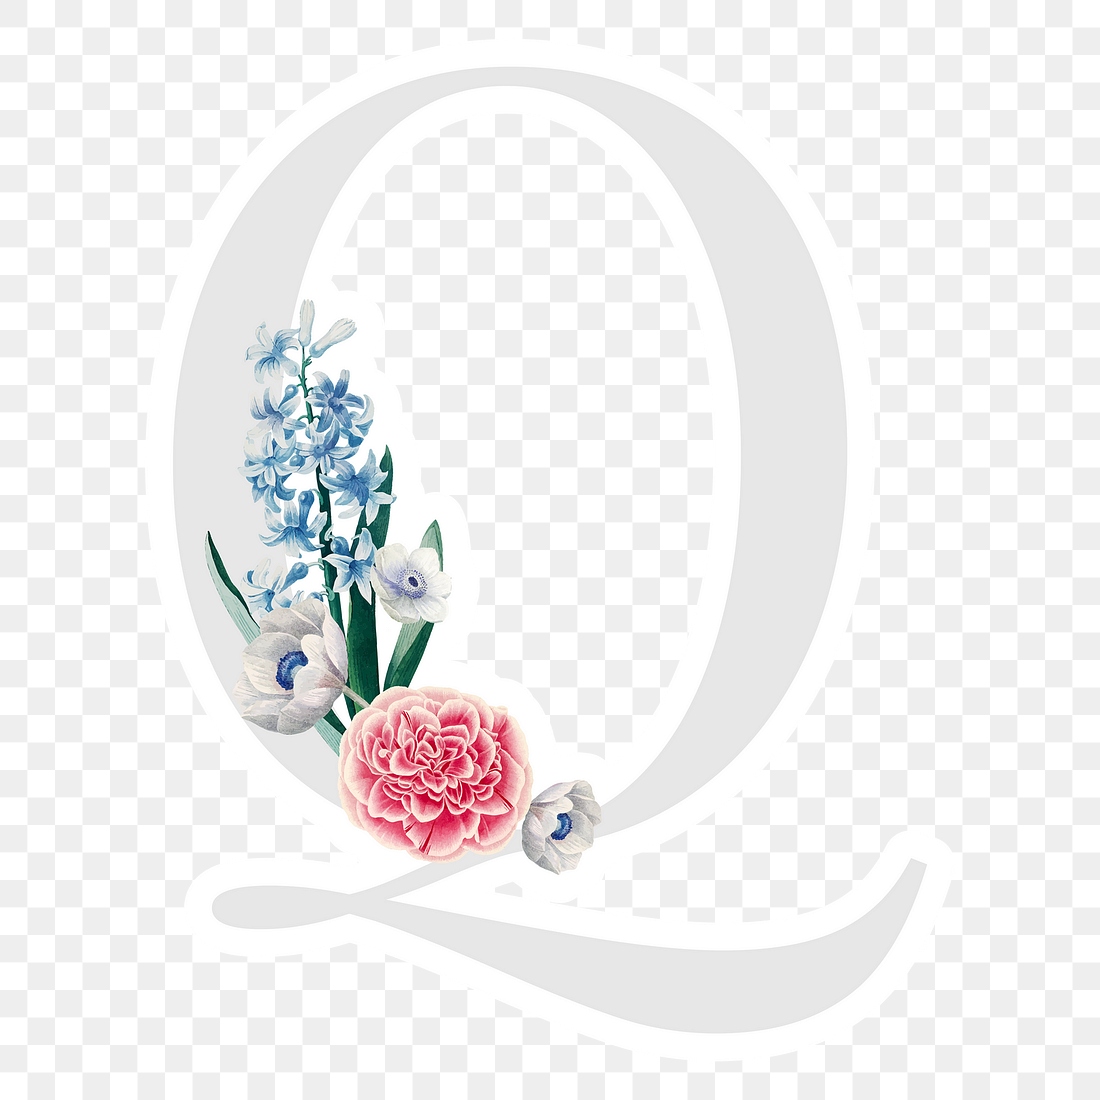 Flower decorated capital letter Q | Free PNG Sticker - rawpixel